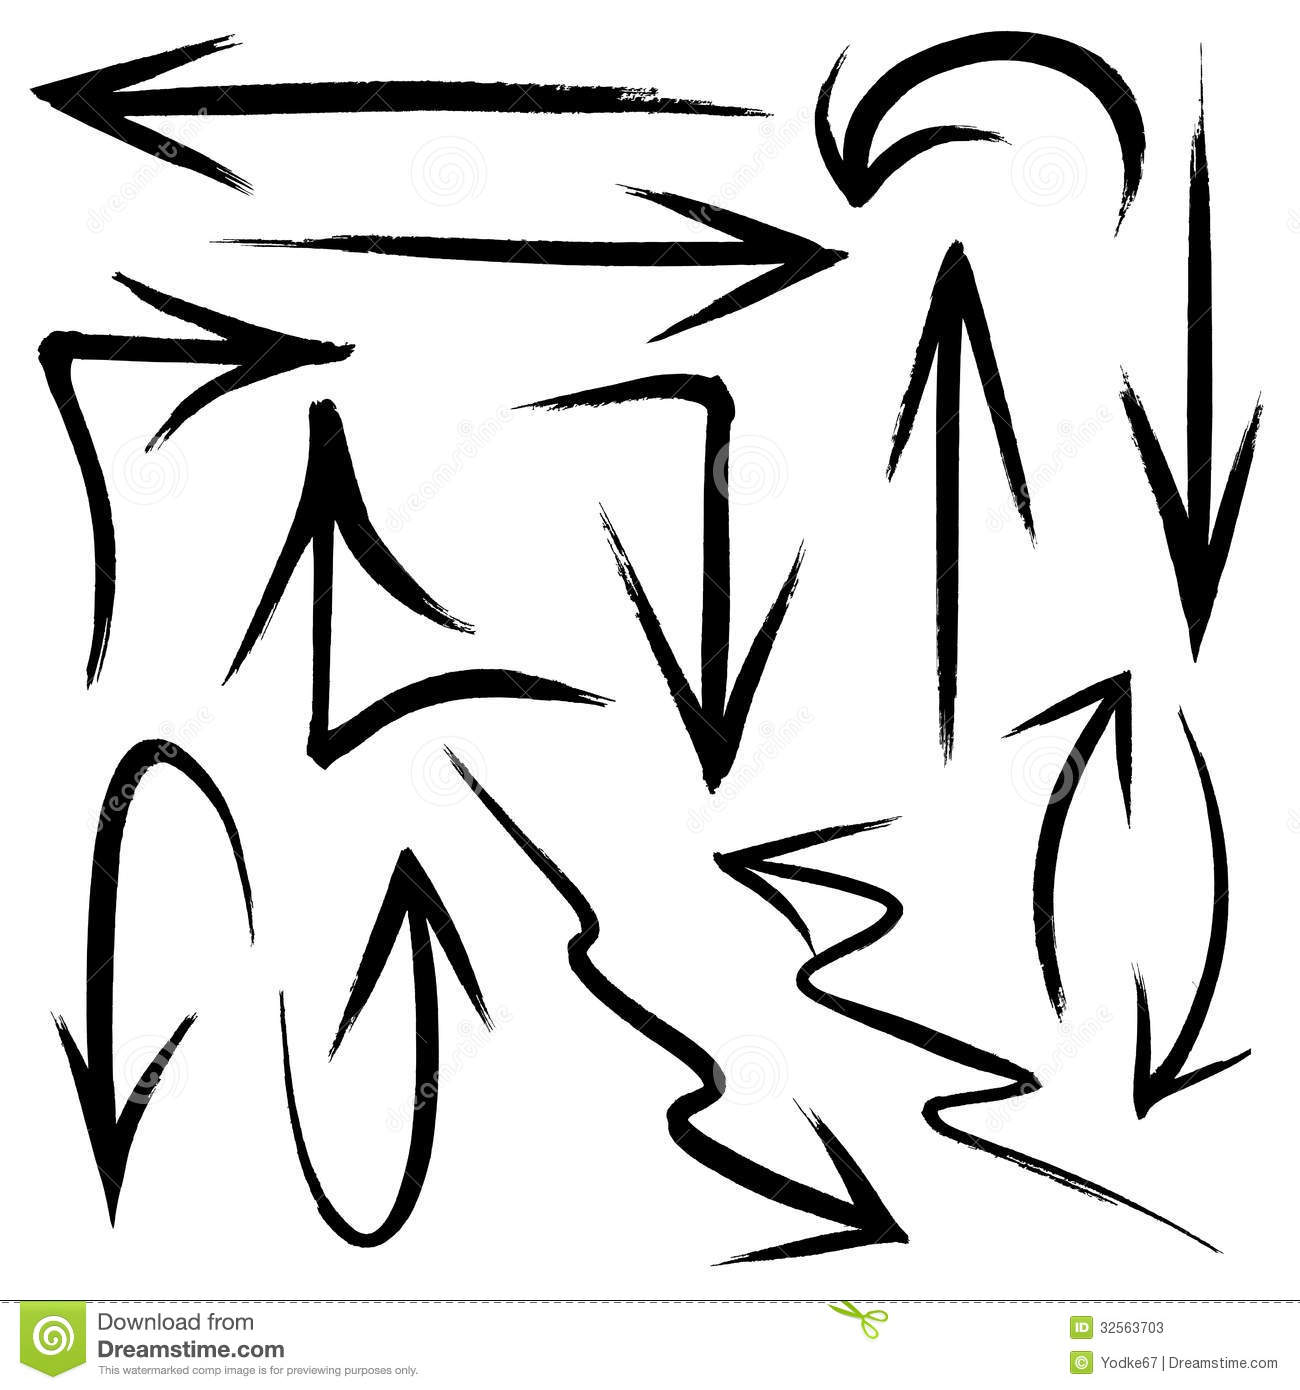 Collection Of Hand Drawn Doodle Style Arrows In Various Directions And